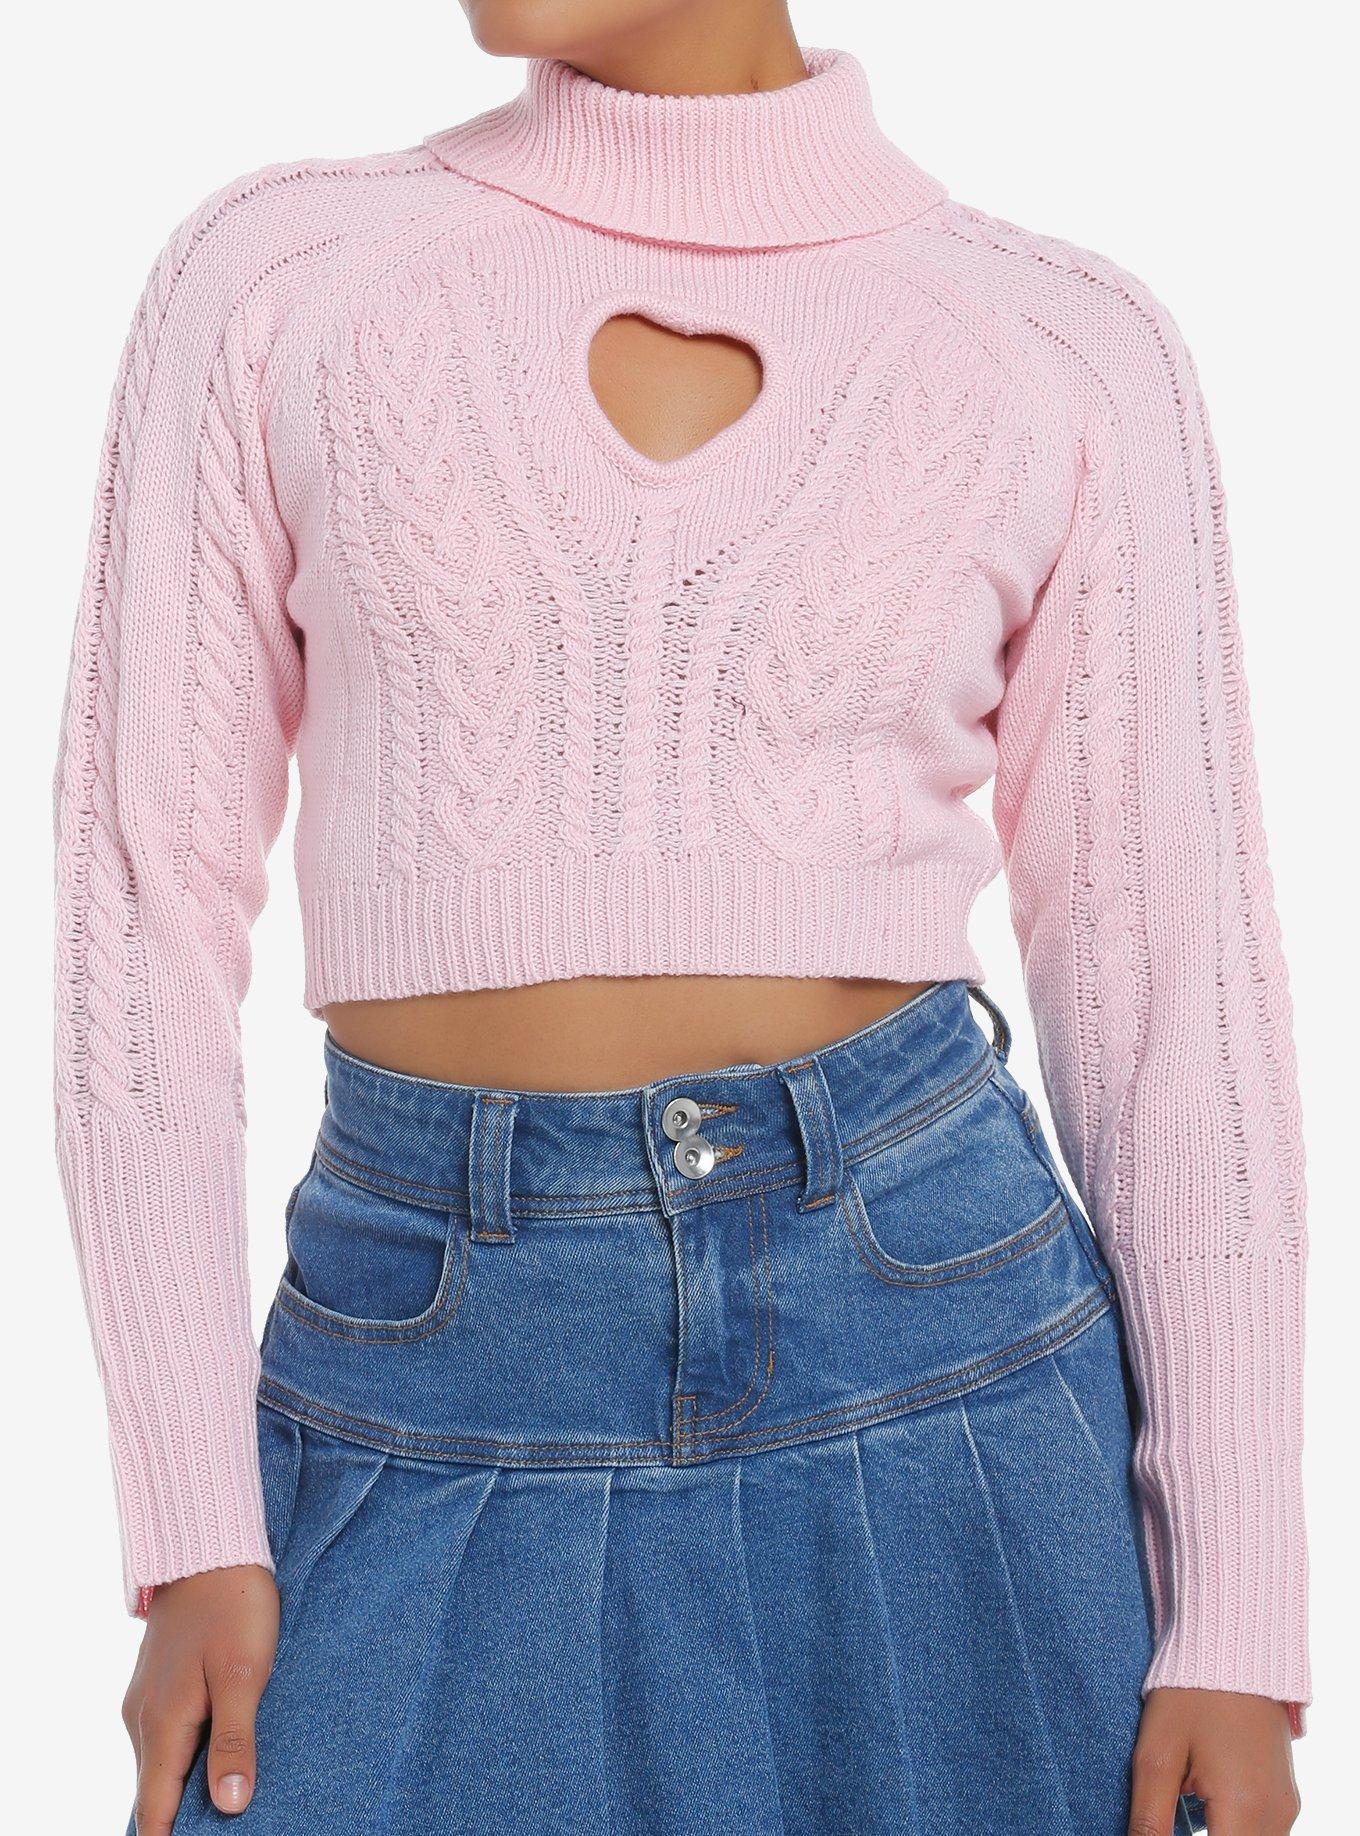 Sweet Society Pastel Pink Cable Knit Heart Girls Turtleneck Sweater